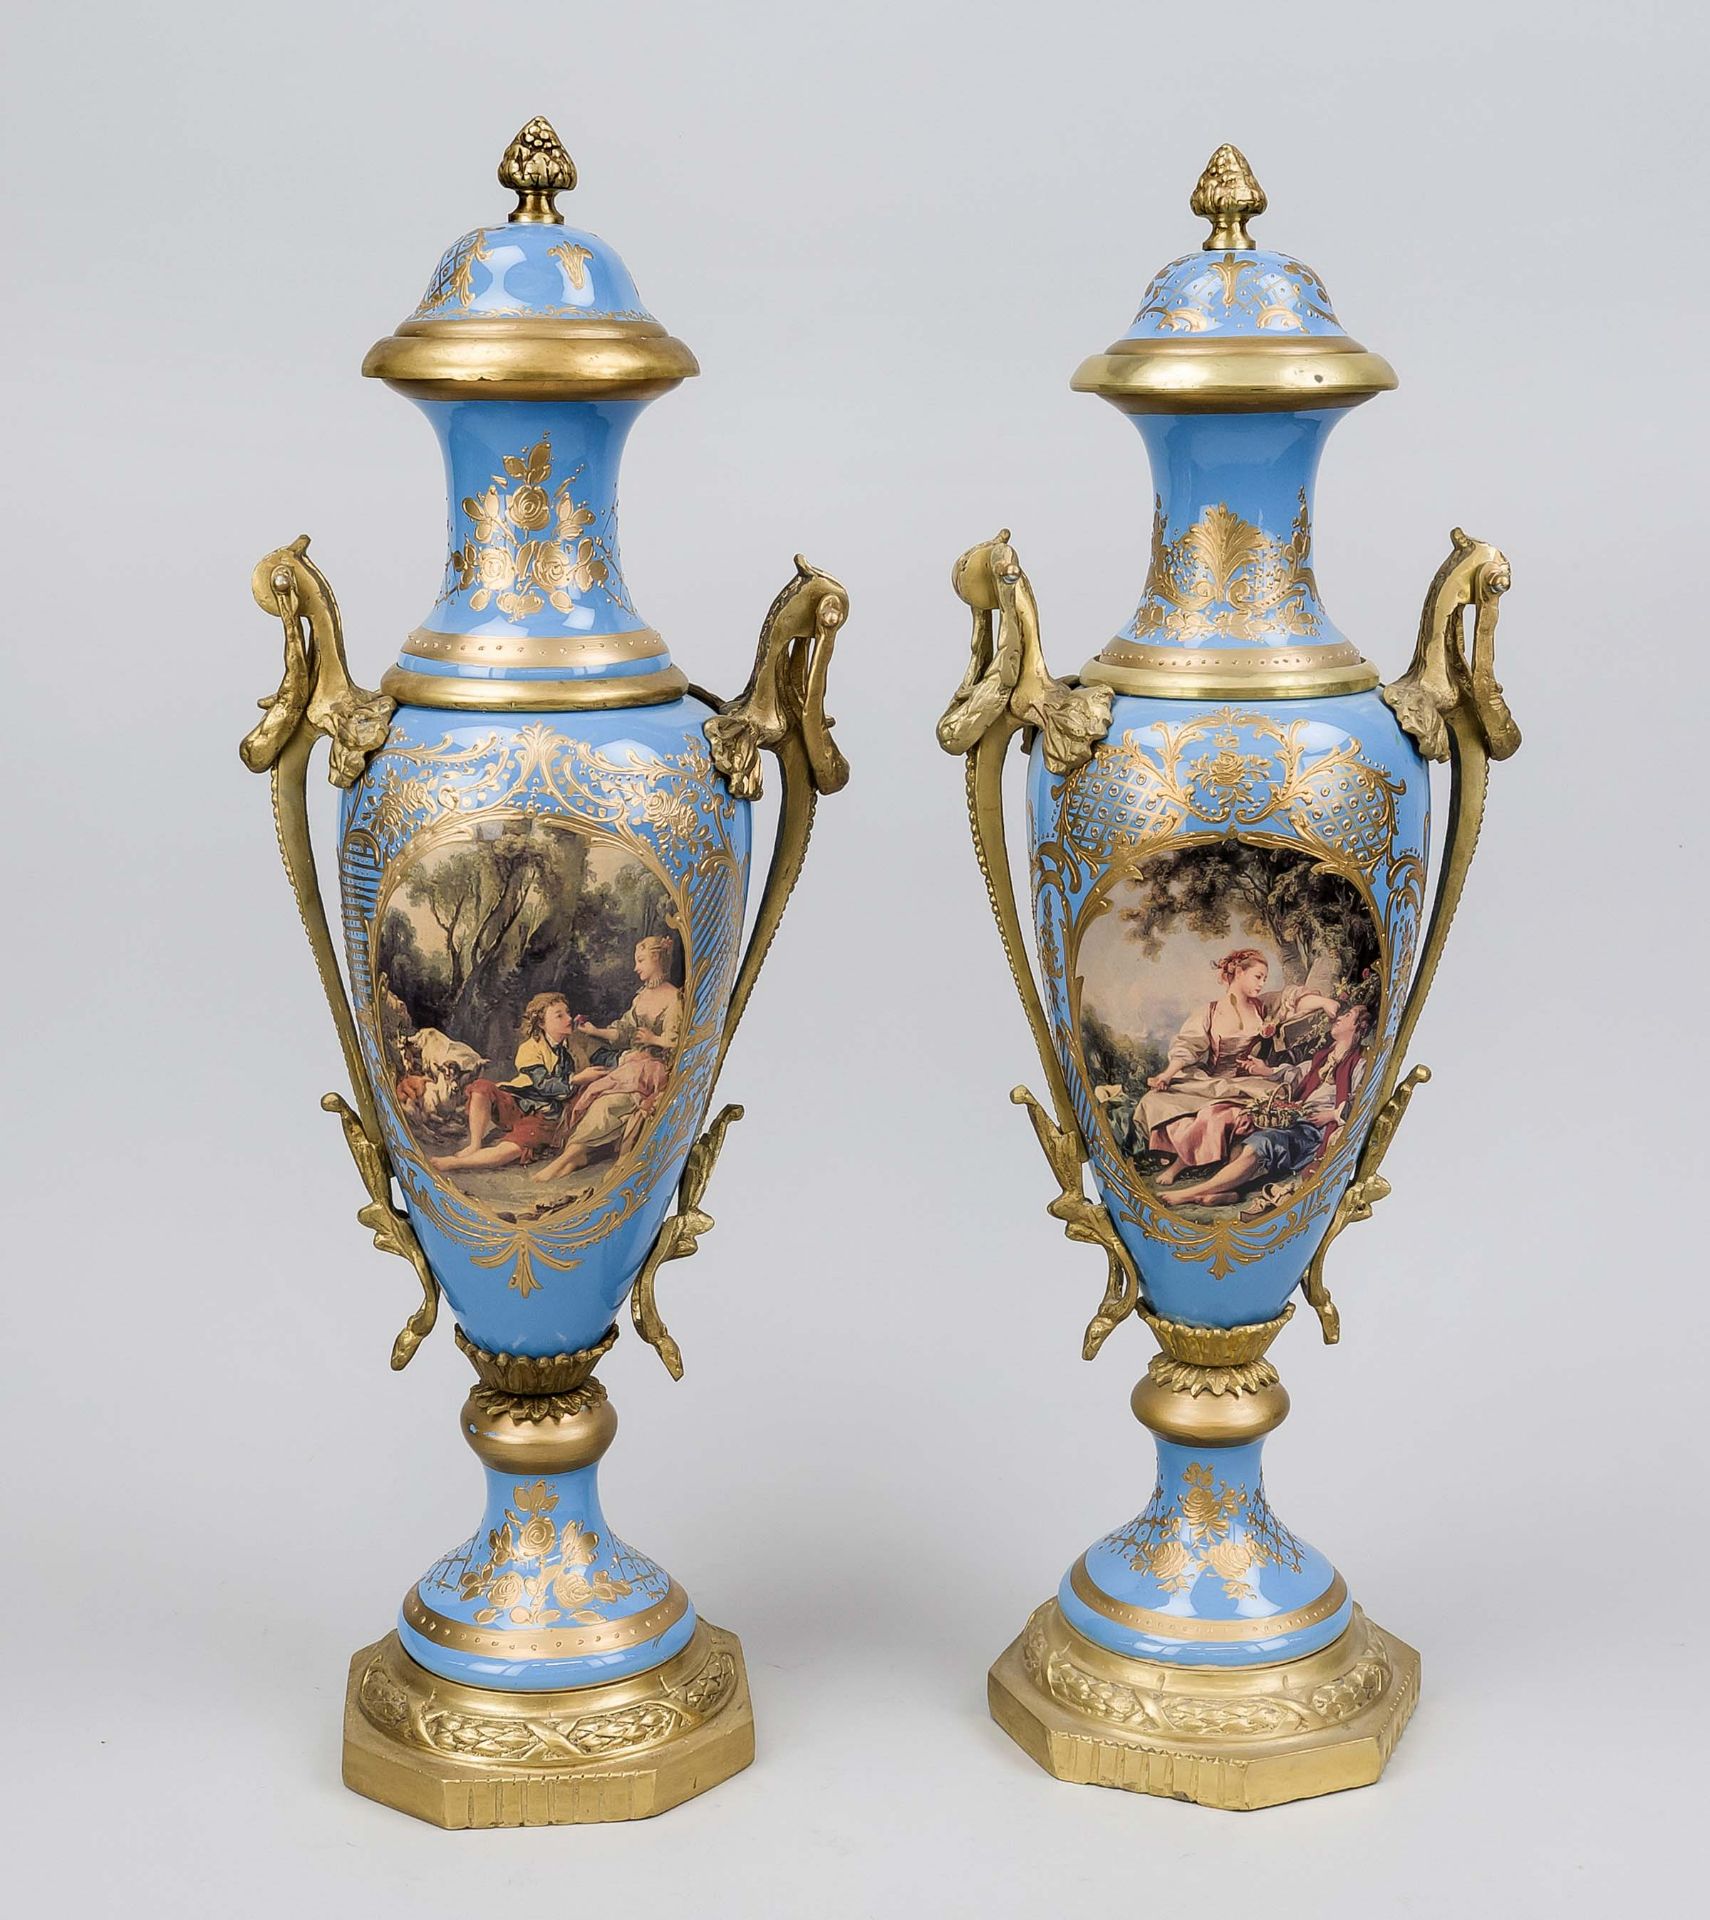 Pair of Sèvre-style ceremonial vases, 20th century Light blue-round lidded vase with bronze